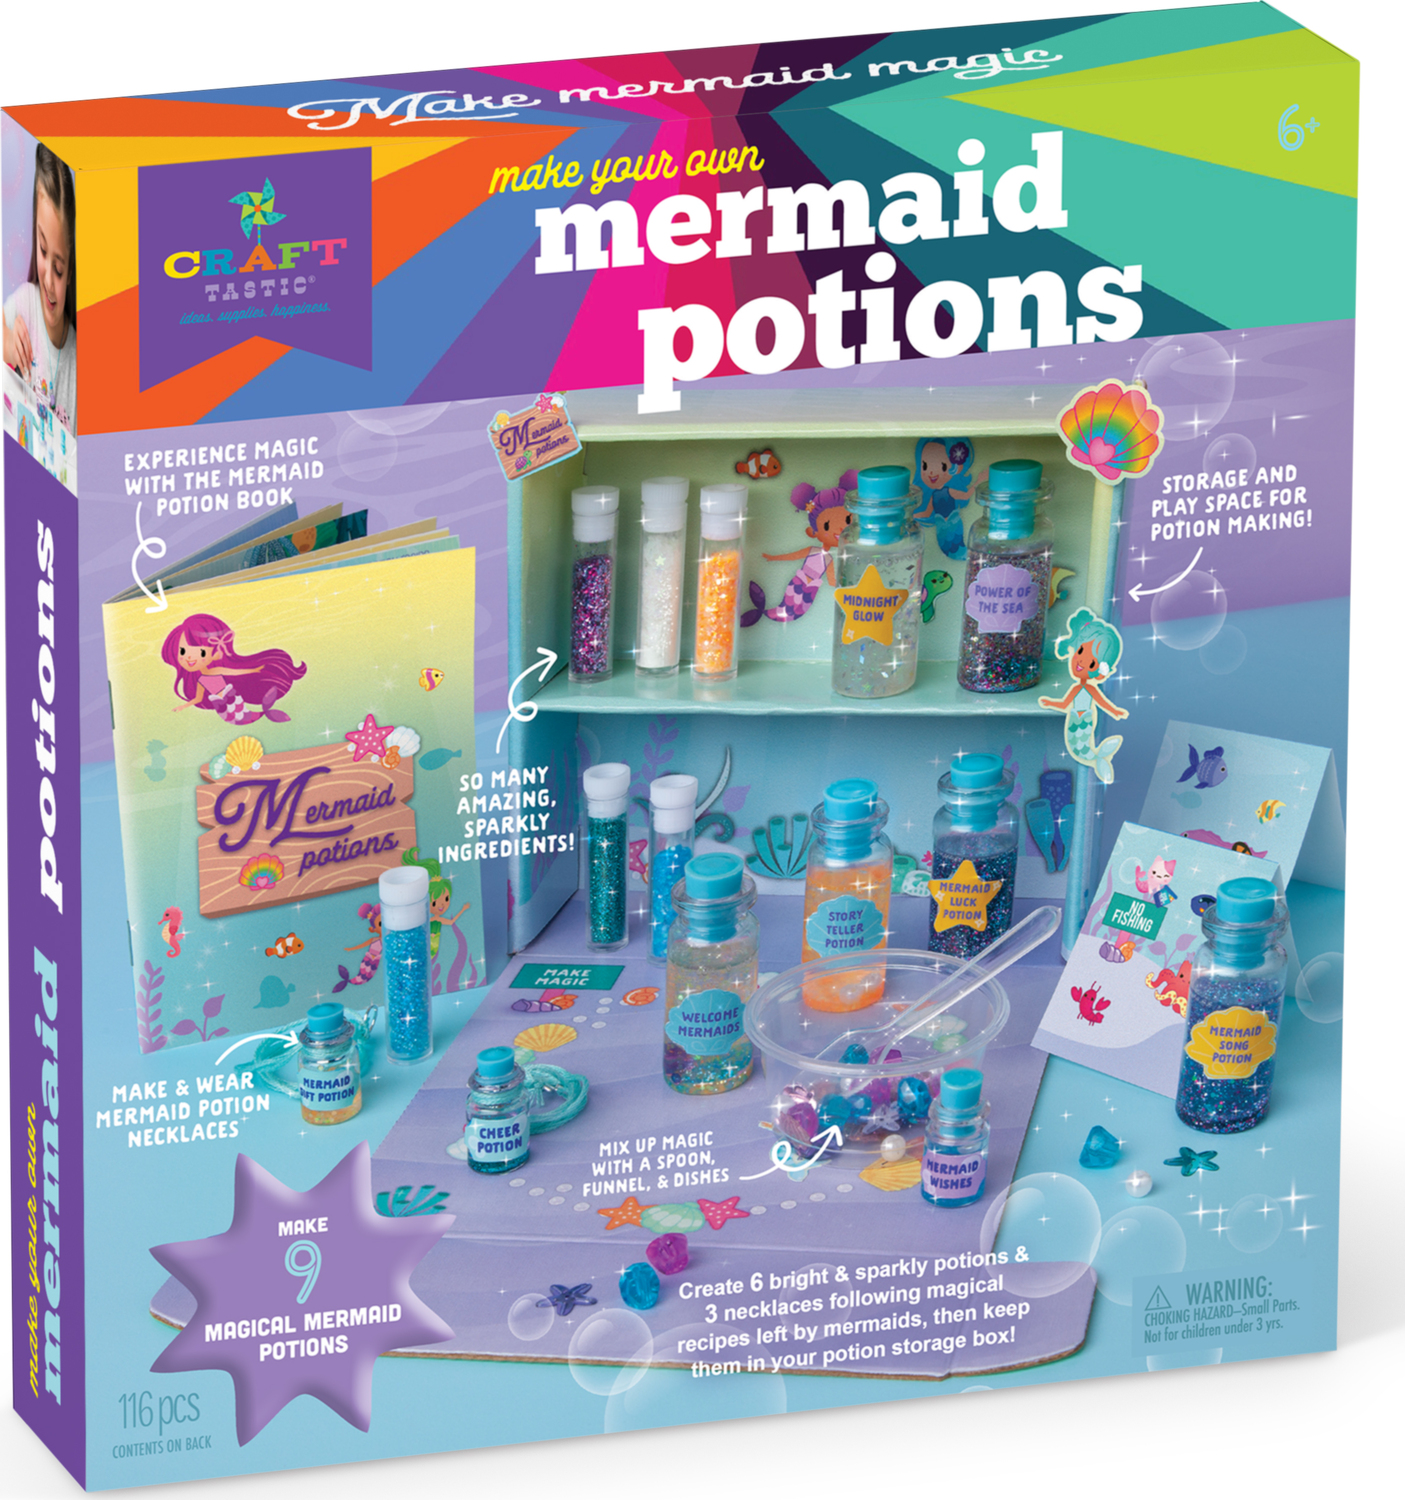 DIY Fairy Potions Kit for Kids - Make Your Own Fairy Potions Arts